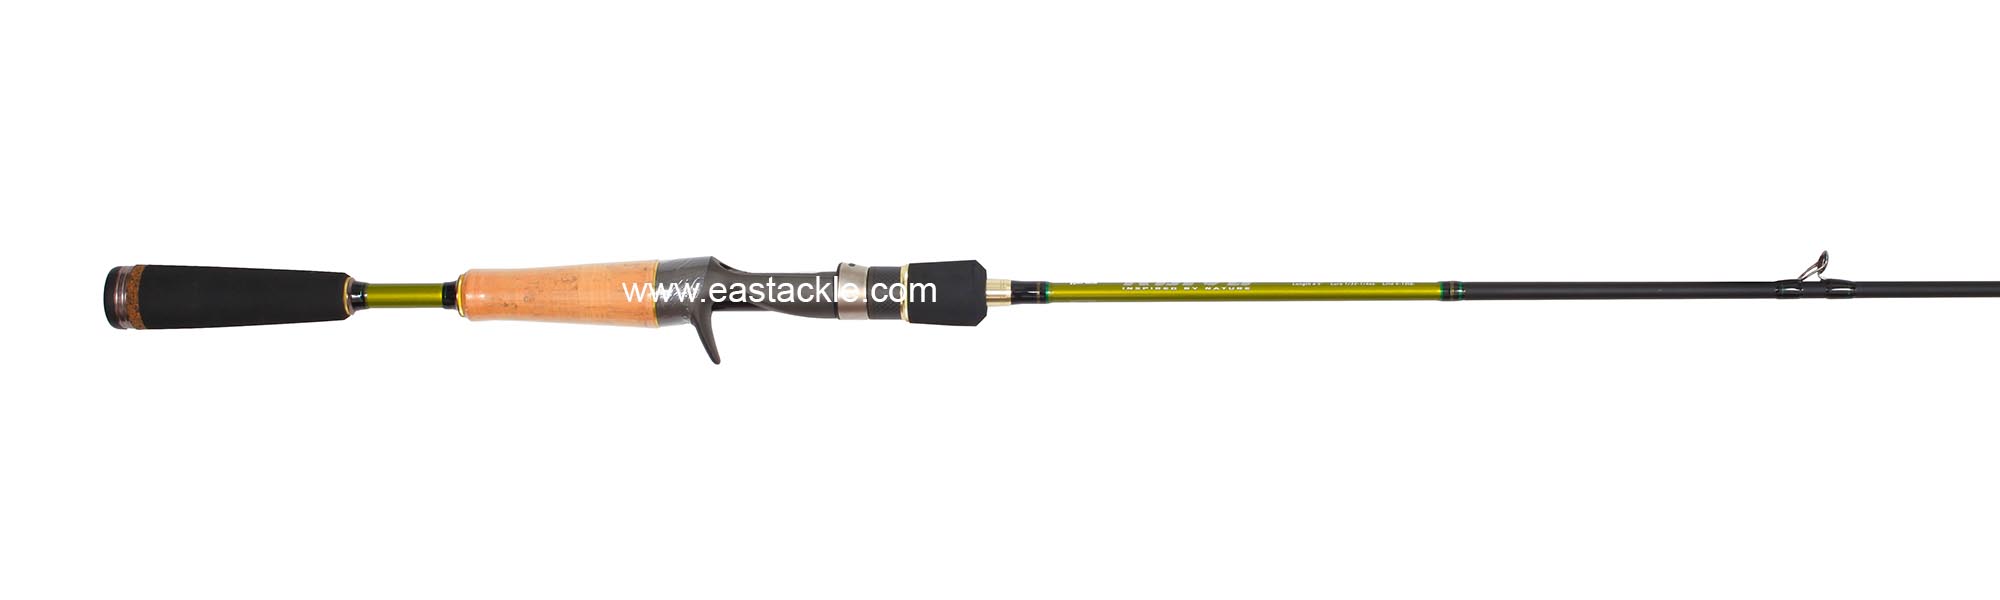 Rapala - Koivu - KVC662MH - Bait Casting Rod - Butt to Stripper Guide (Side View) | Eastackle